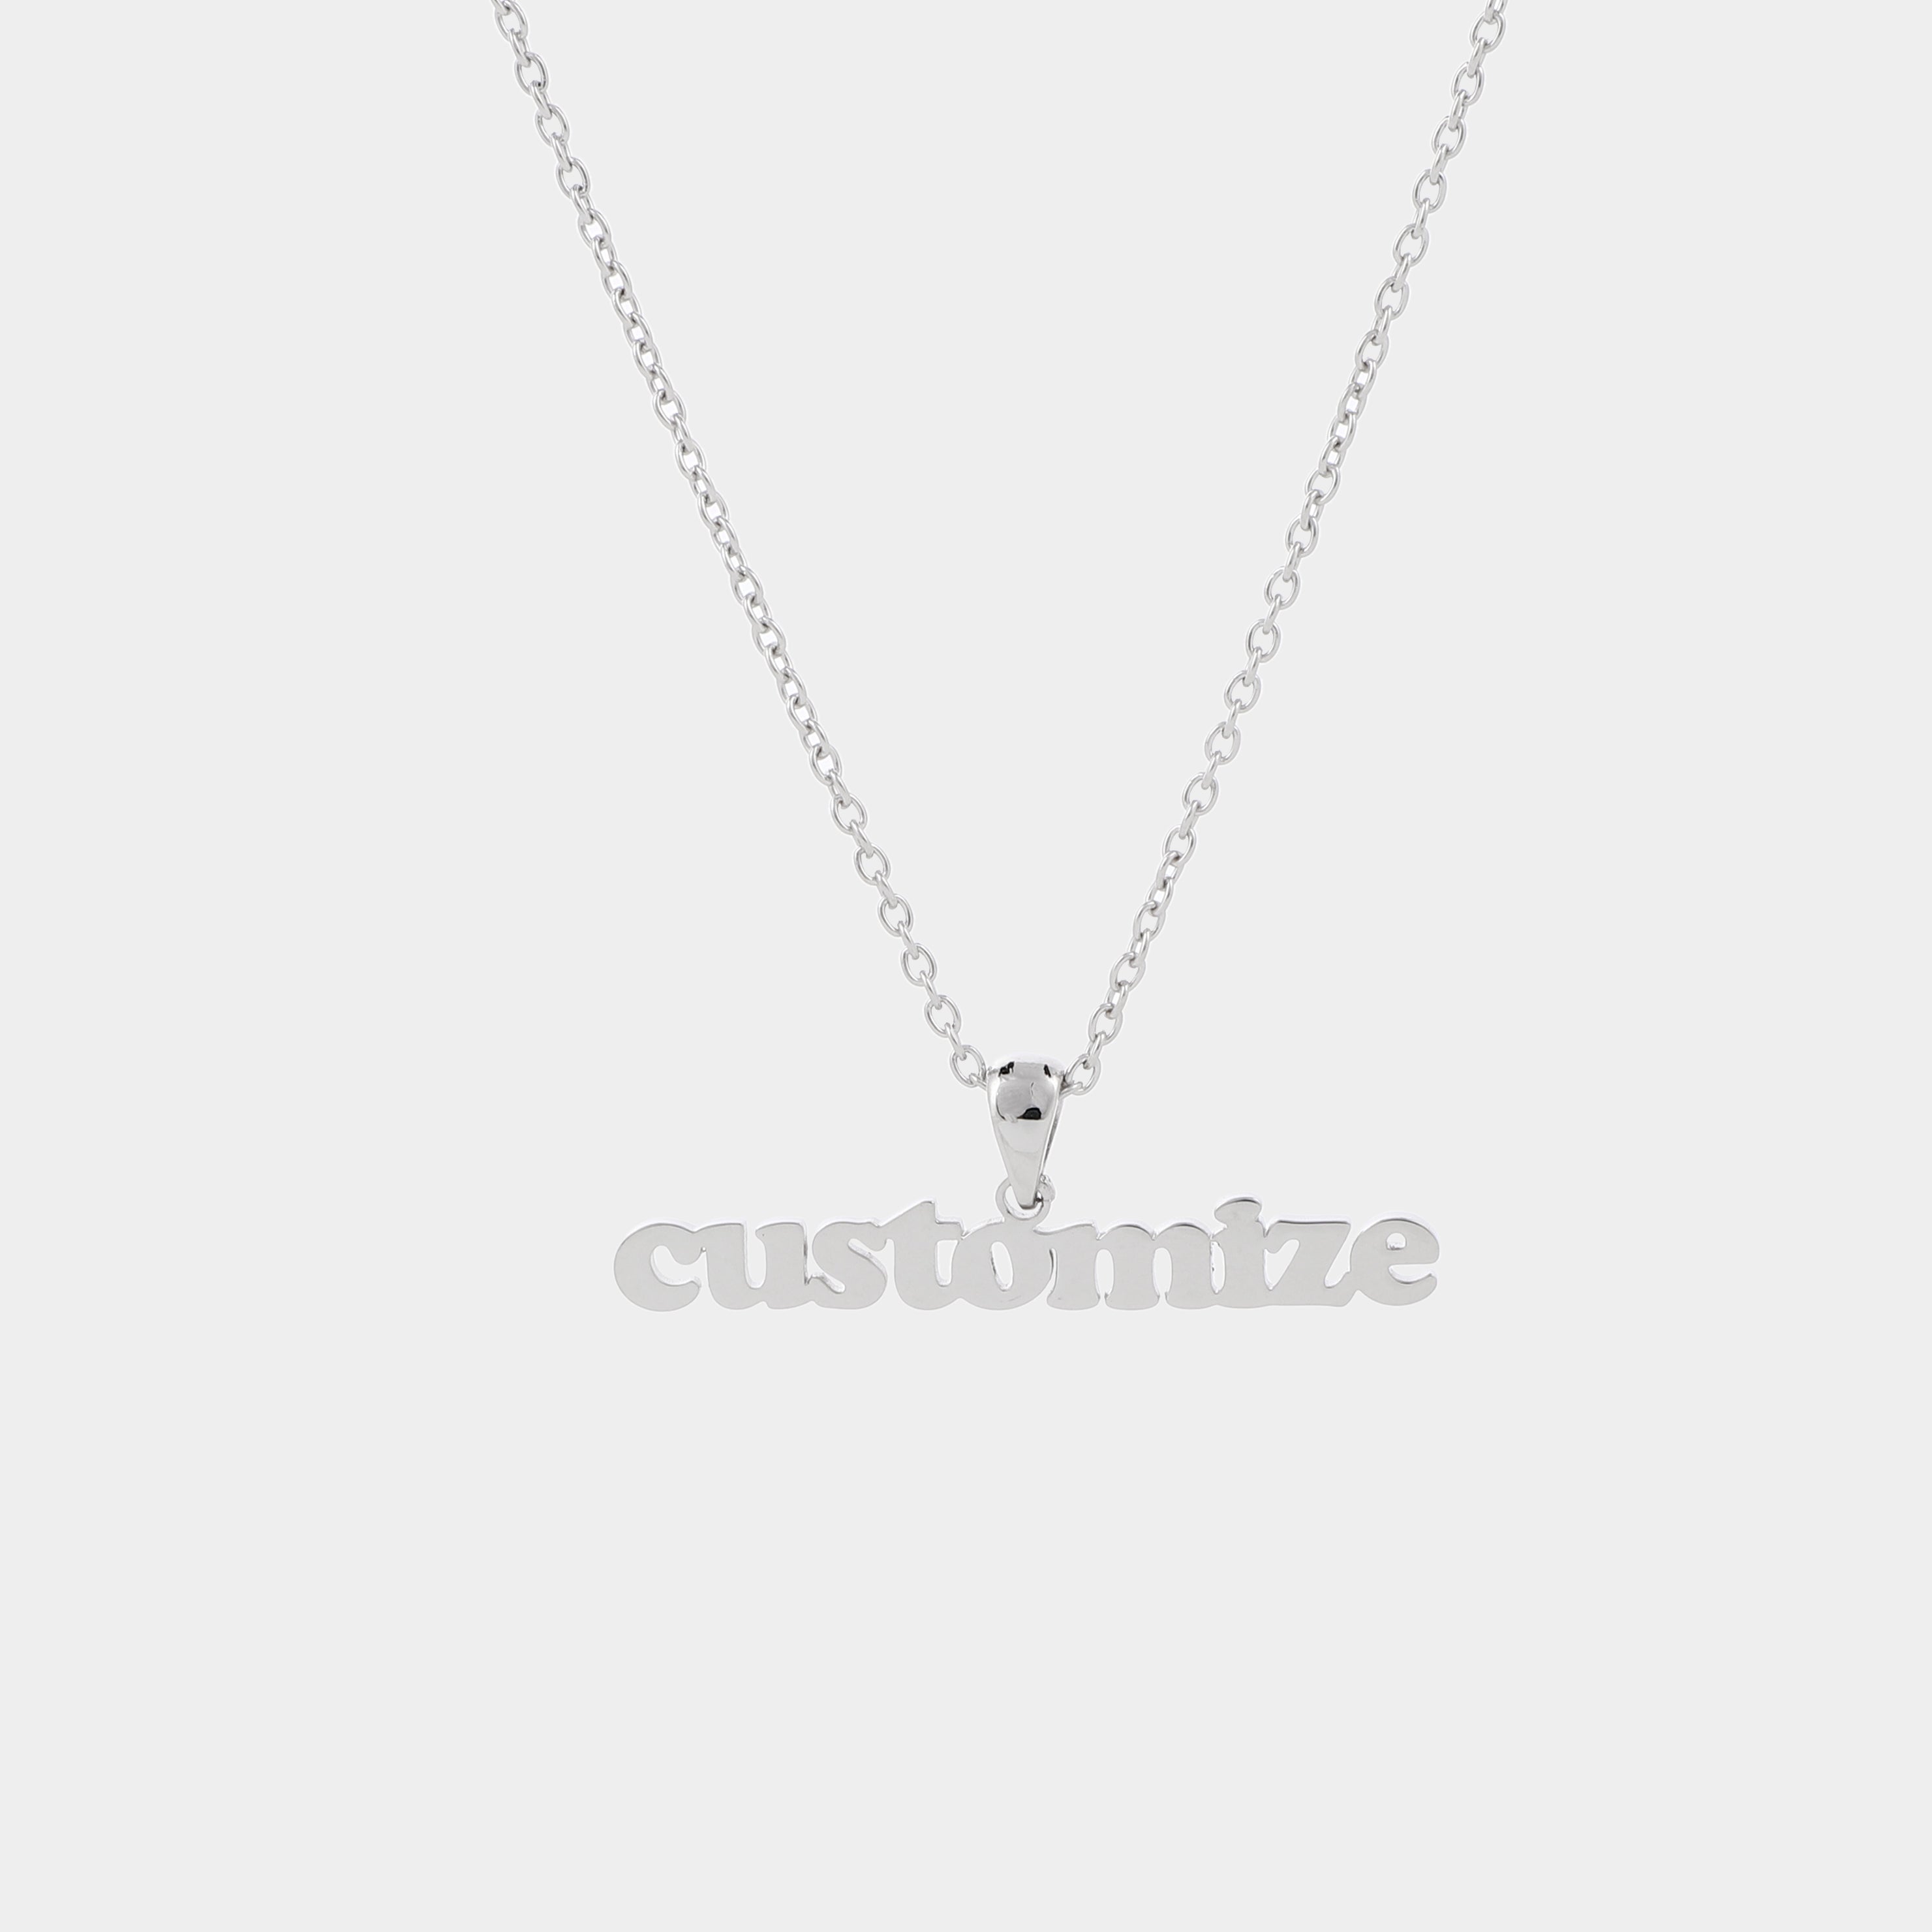 PERSONALIZE NECKLACE NAME SILVER